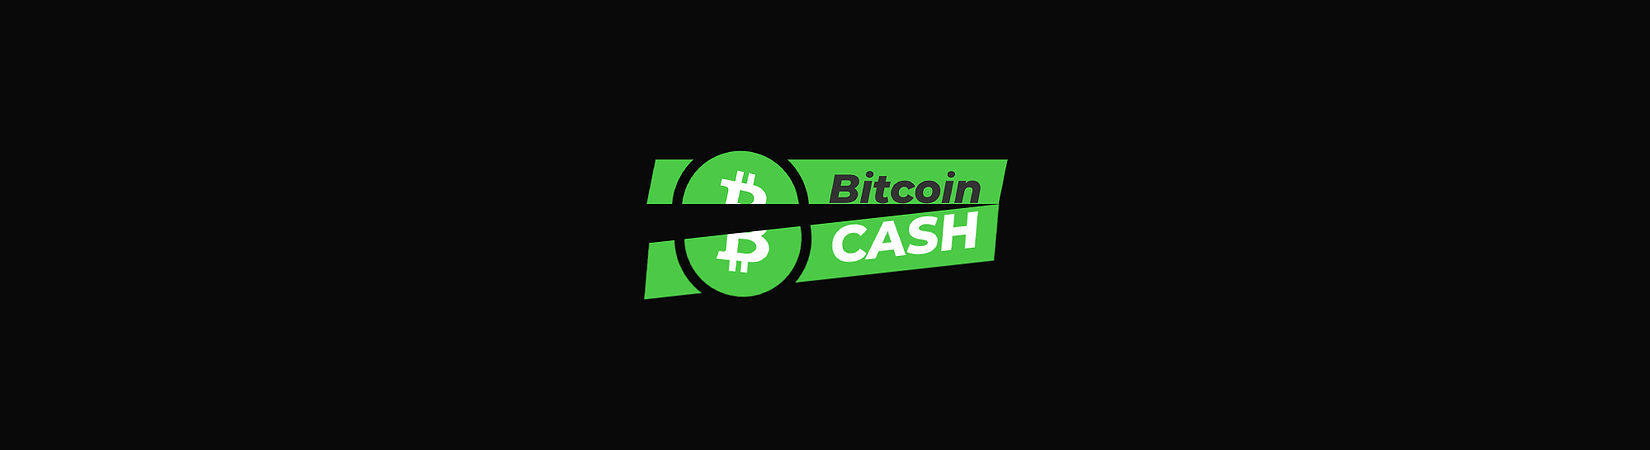 What wallets were will work for bitcoin cash hard fork litecoin faucet direct payout